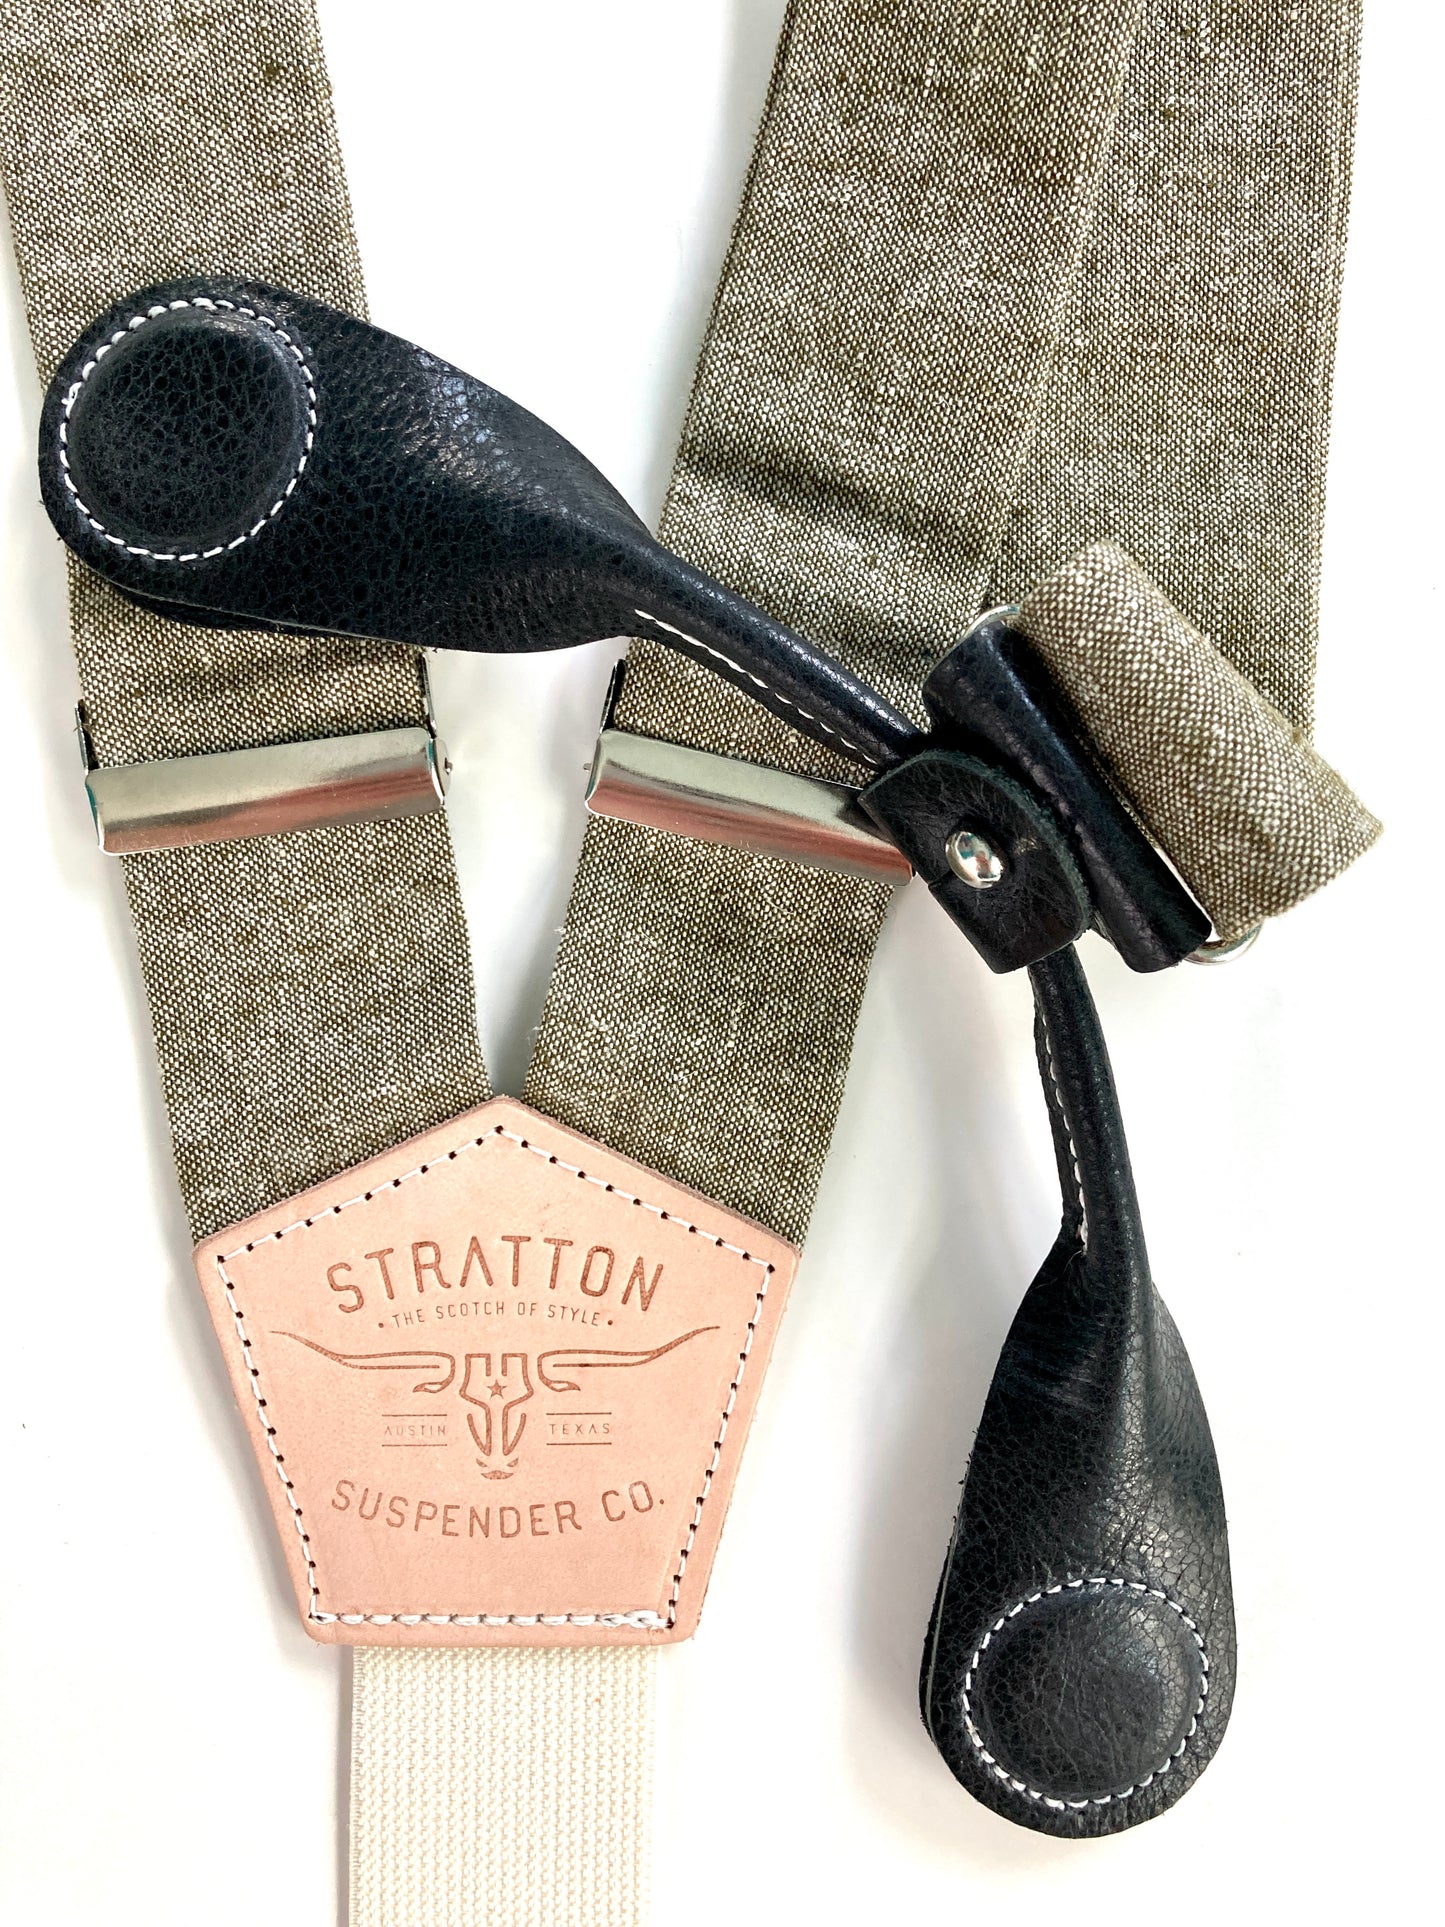 Stratton Suspender Co. features the Olive Green linen suspenders on veg tan shoulder leather with cream colored elastic back strap for the Fall 2022 suspenders collection Magnetic Stratton Suspender clasps in Black Pontedero Italian leather hand-picked by Stratton Suspender Co.